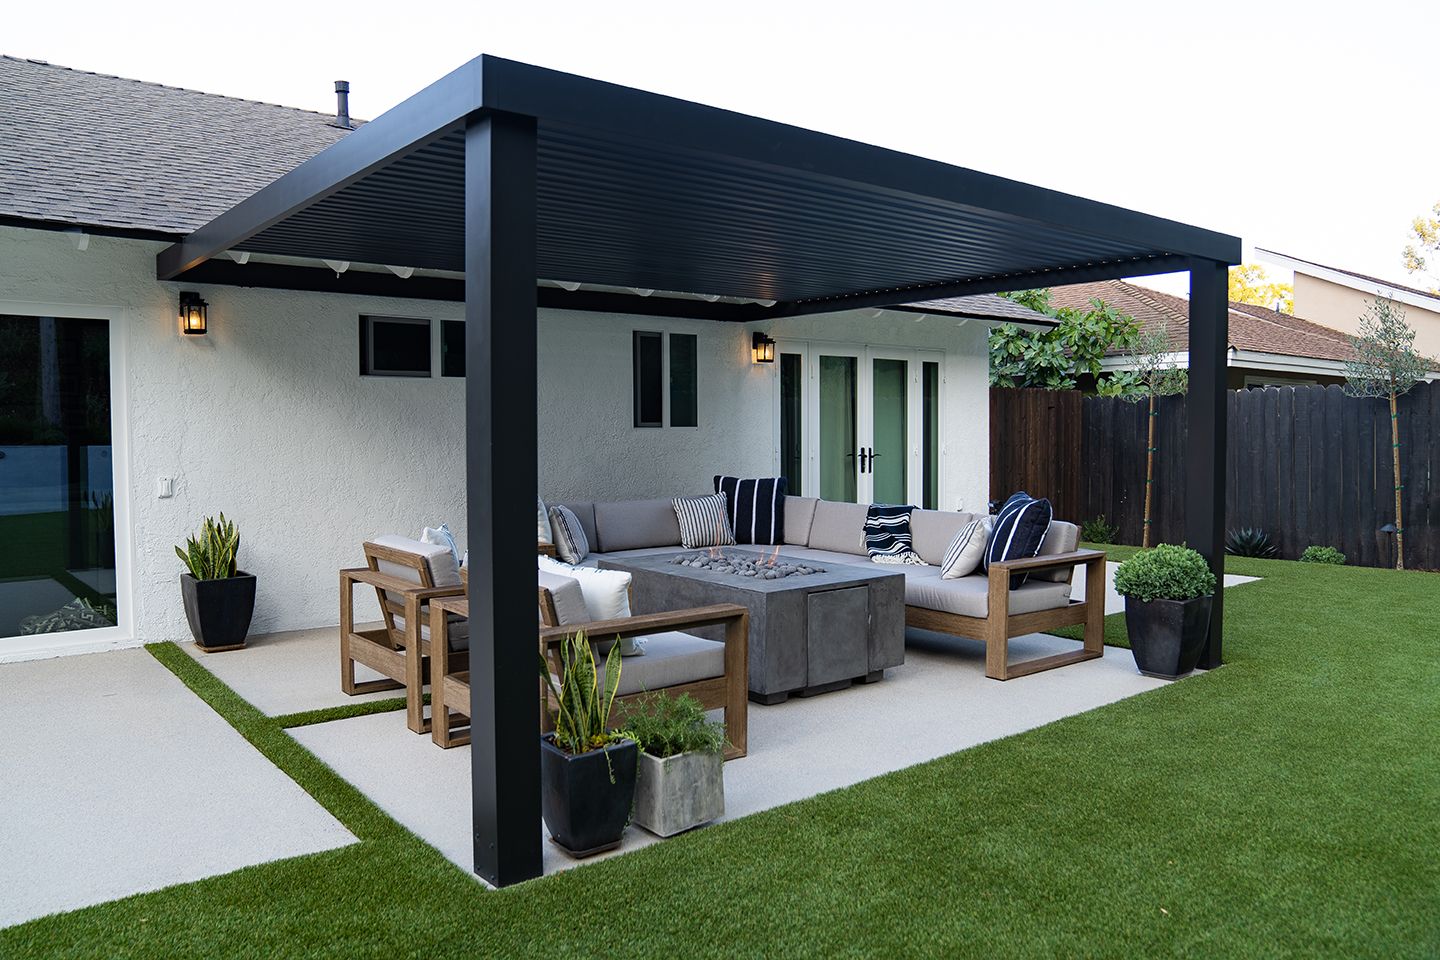 Transform Your Outdoor Space With A Stunning Front Patio Pergola